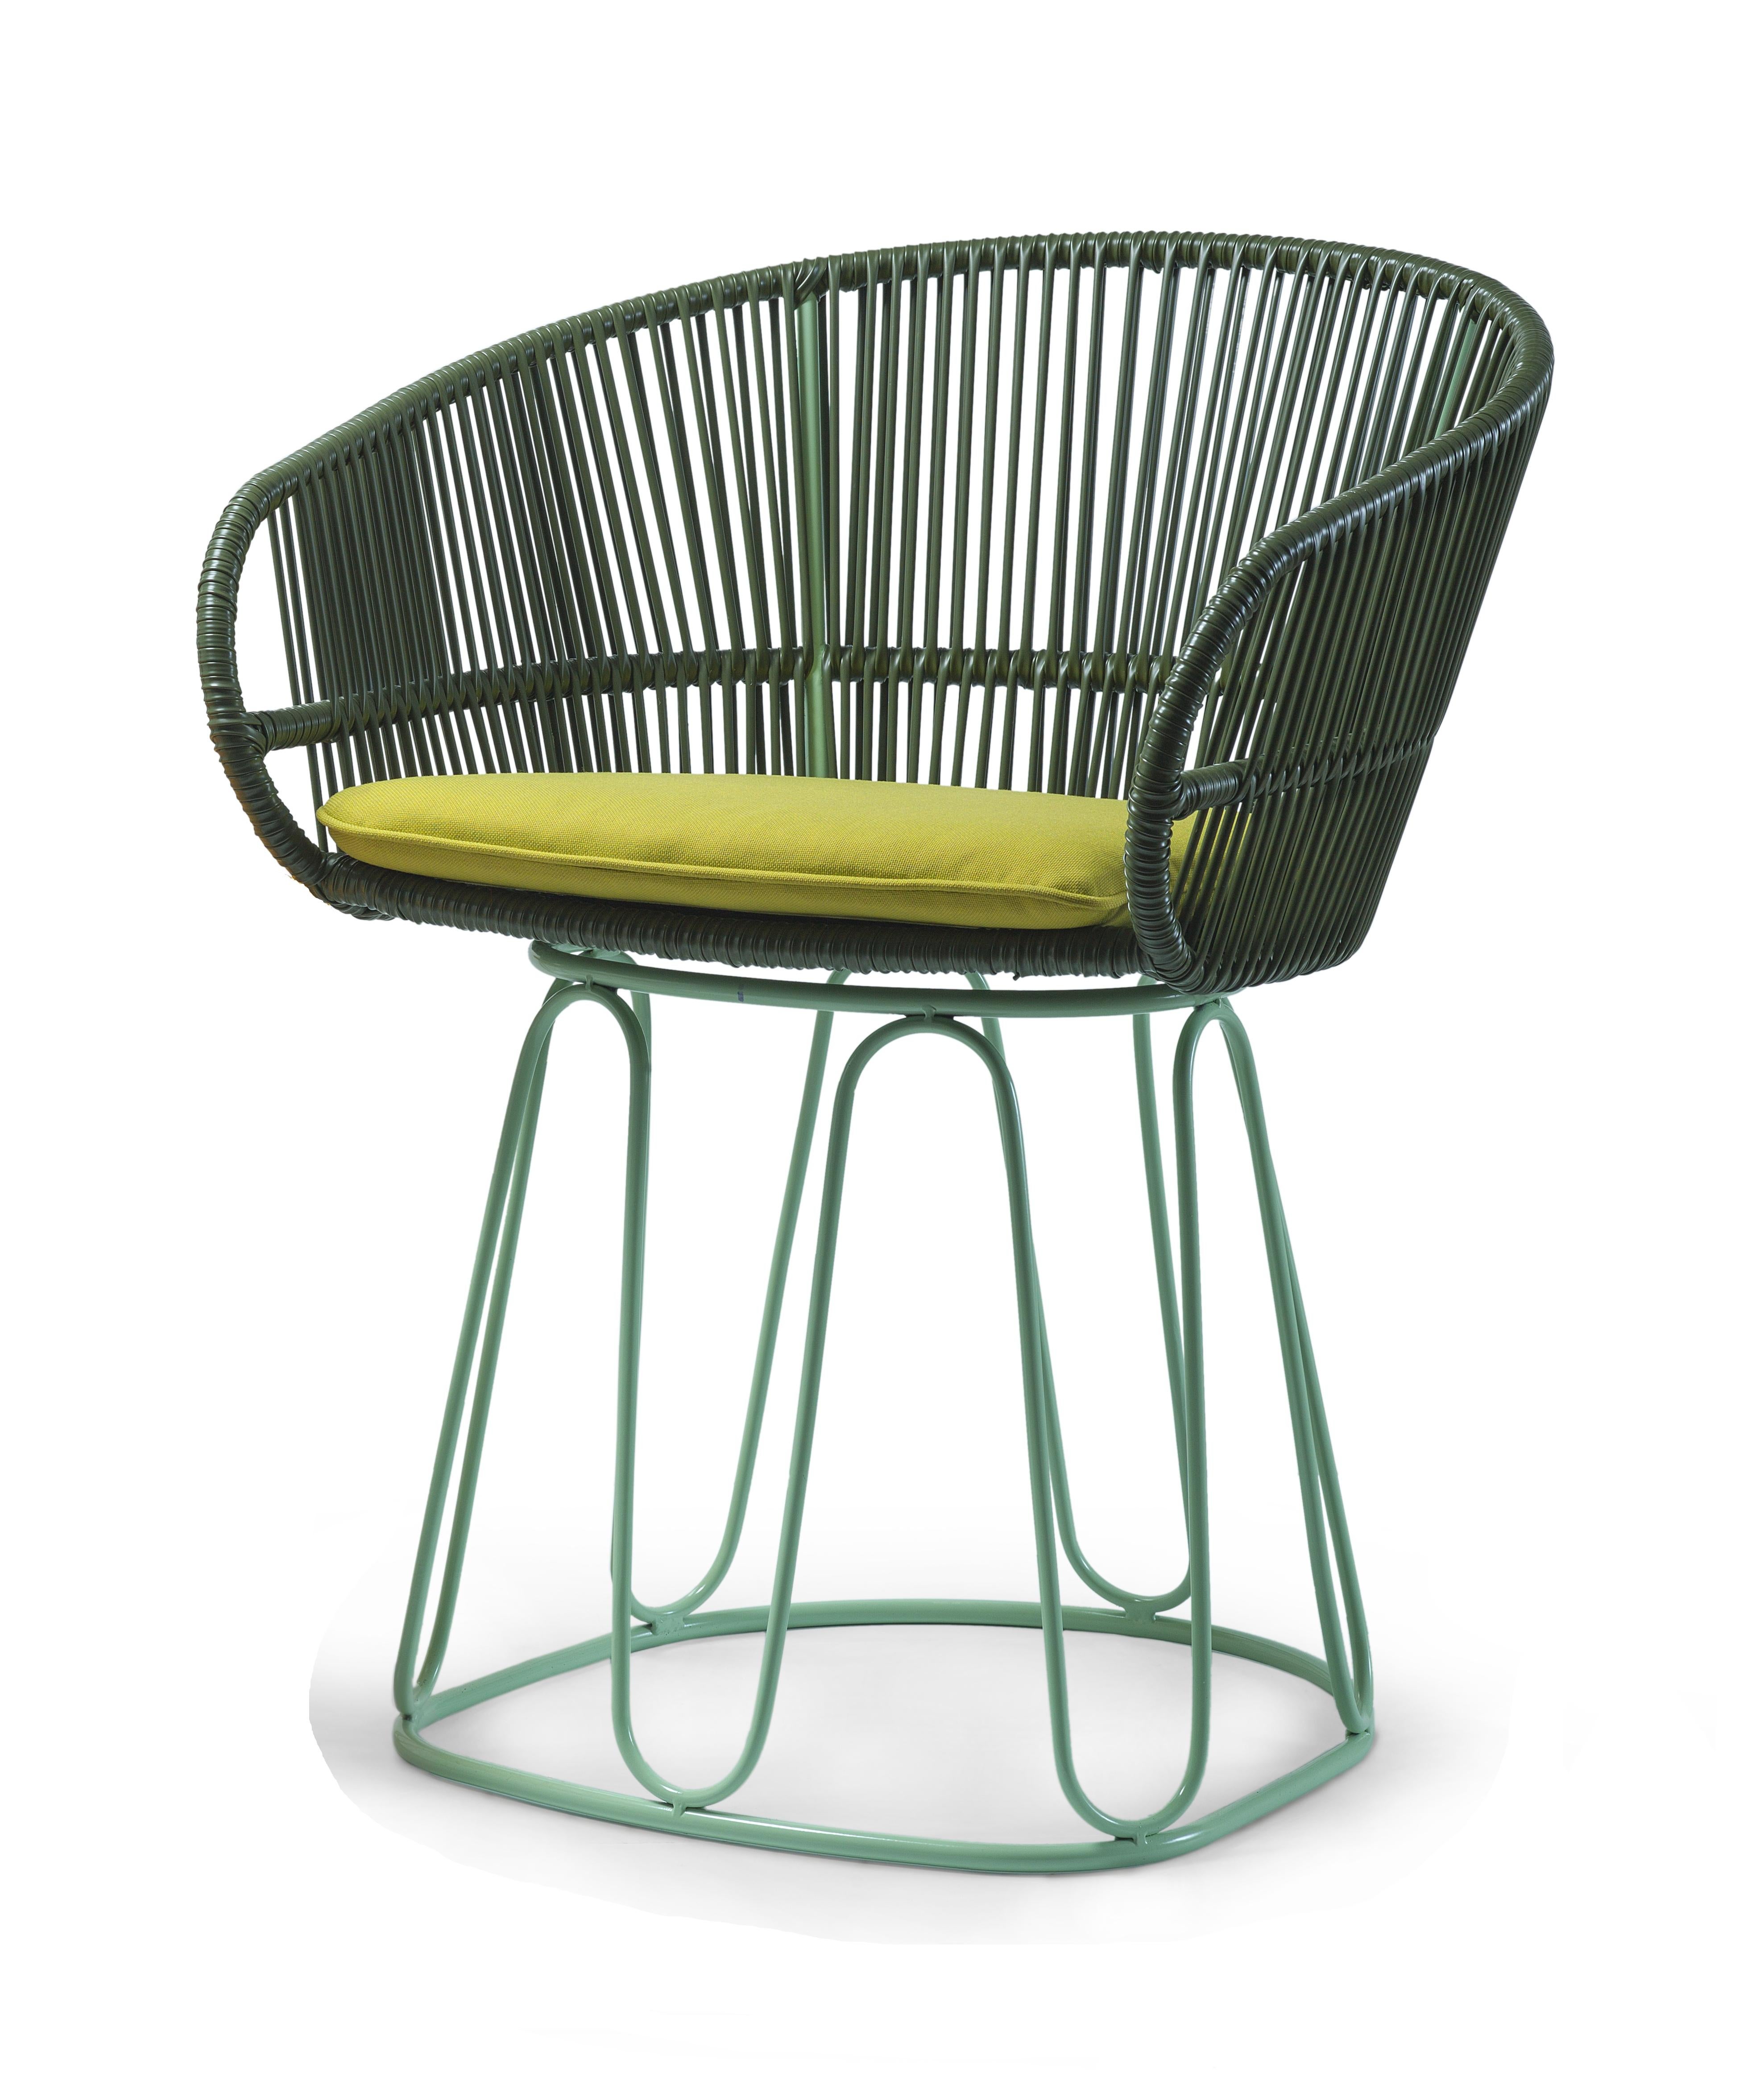 Set of 4 Olive Circo dining chair by Sebastian Herkner
Materials: Galvanized and powder-coated tubular steel. PVC strings.
Technique: Made from recycled plastic. Weaved by local craftspeople in Colombia. 
Dimensions: W 61.5 x D 56.5 x H 77.5 cm